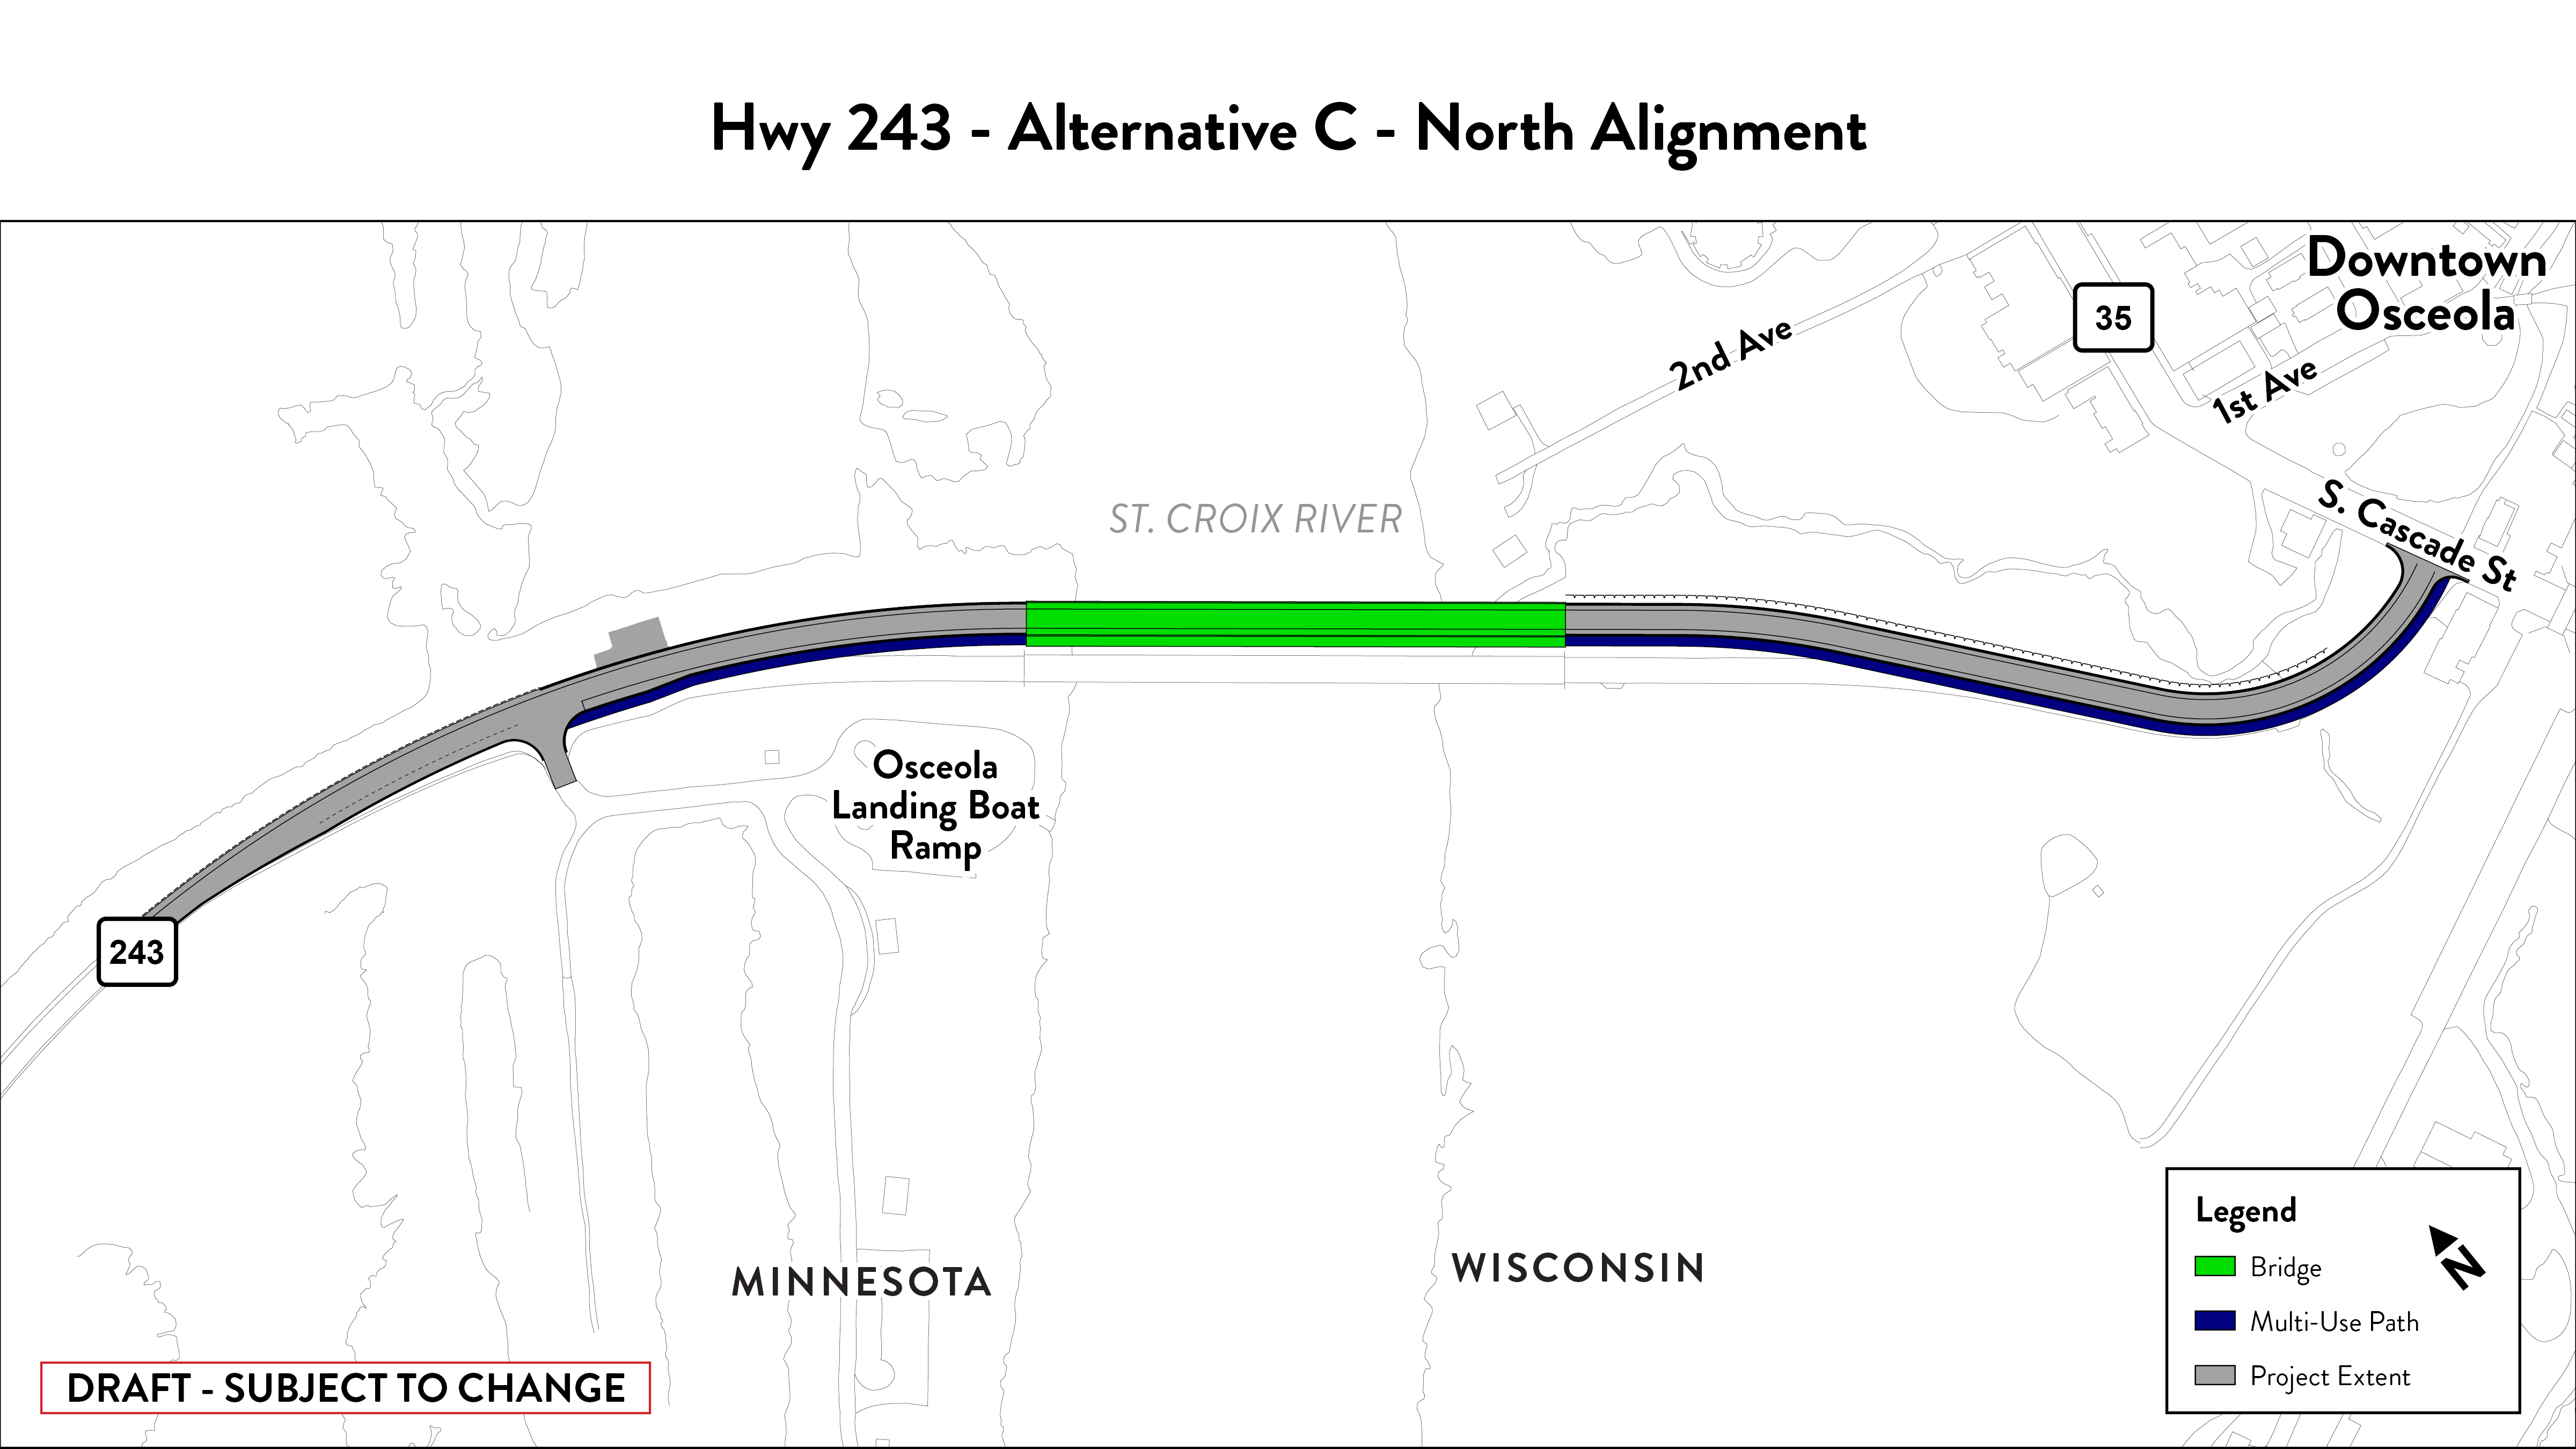 Shows alternative C, including construction limits, proposed and existing road, and path for people walking or biking.